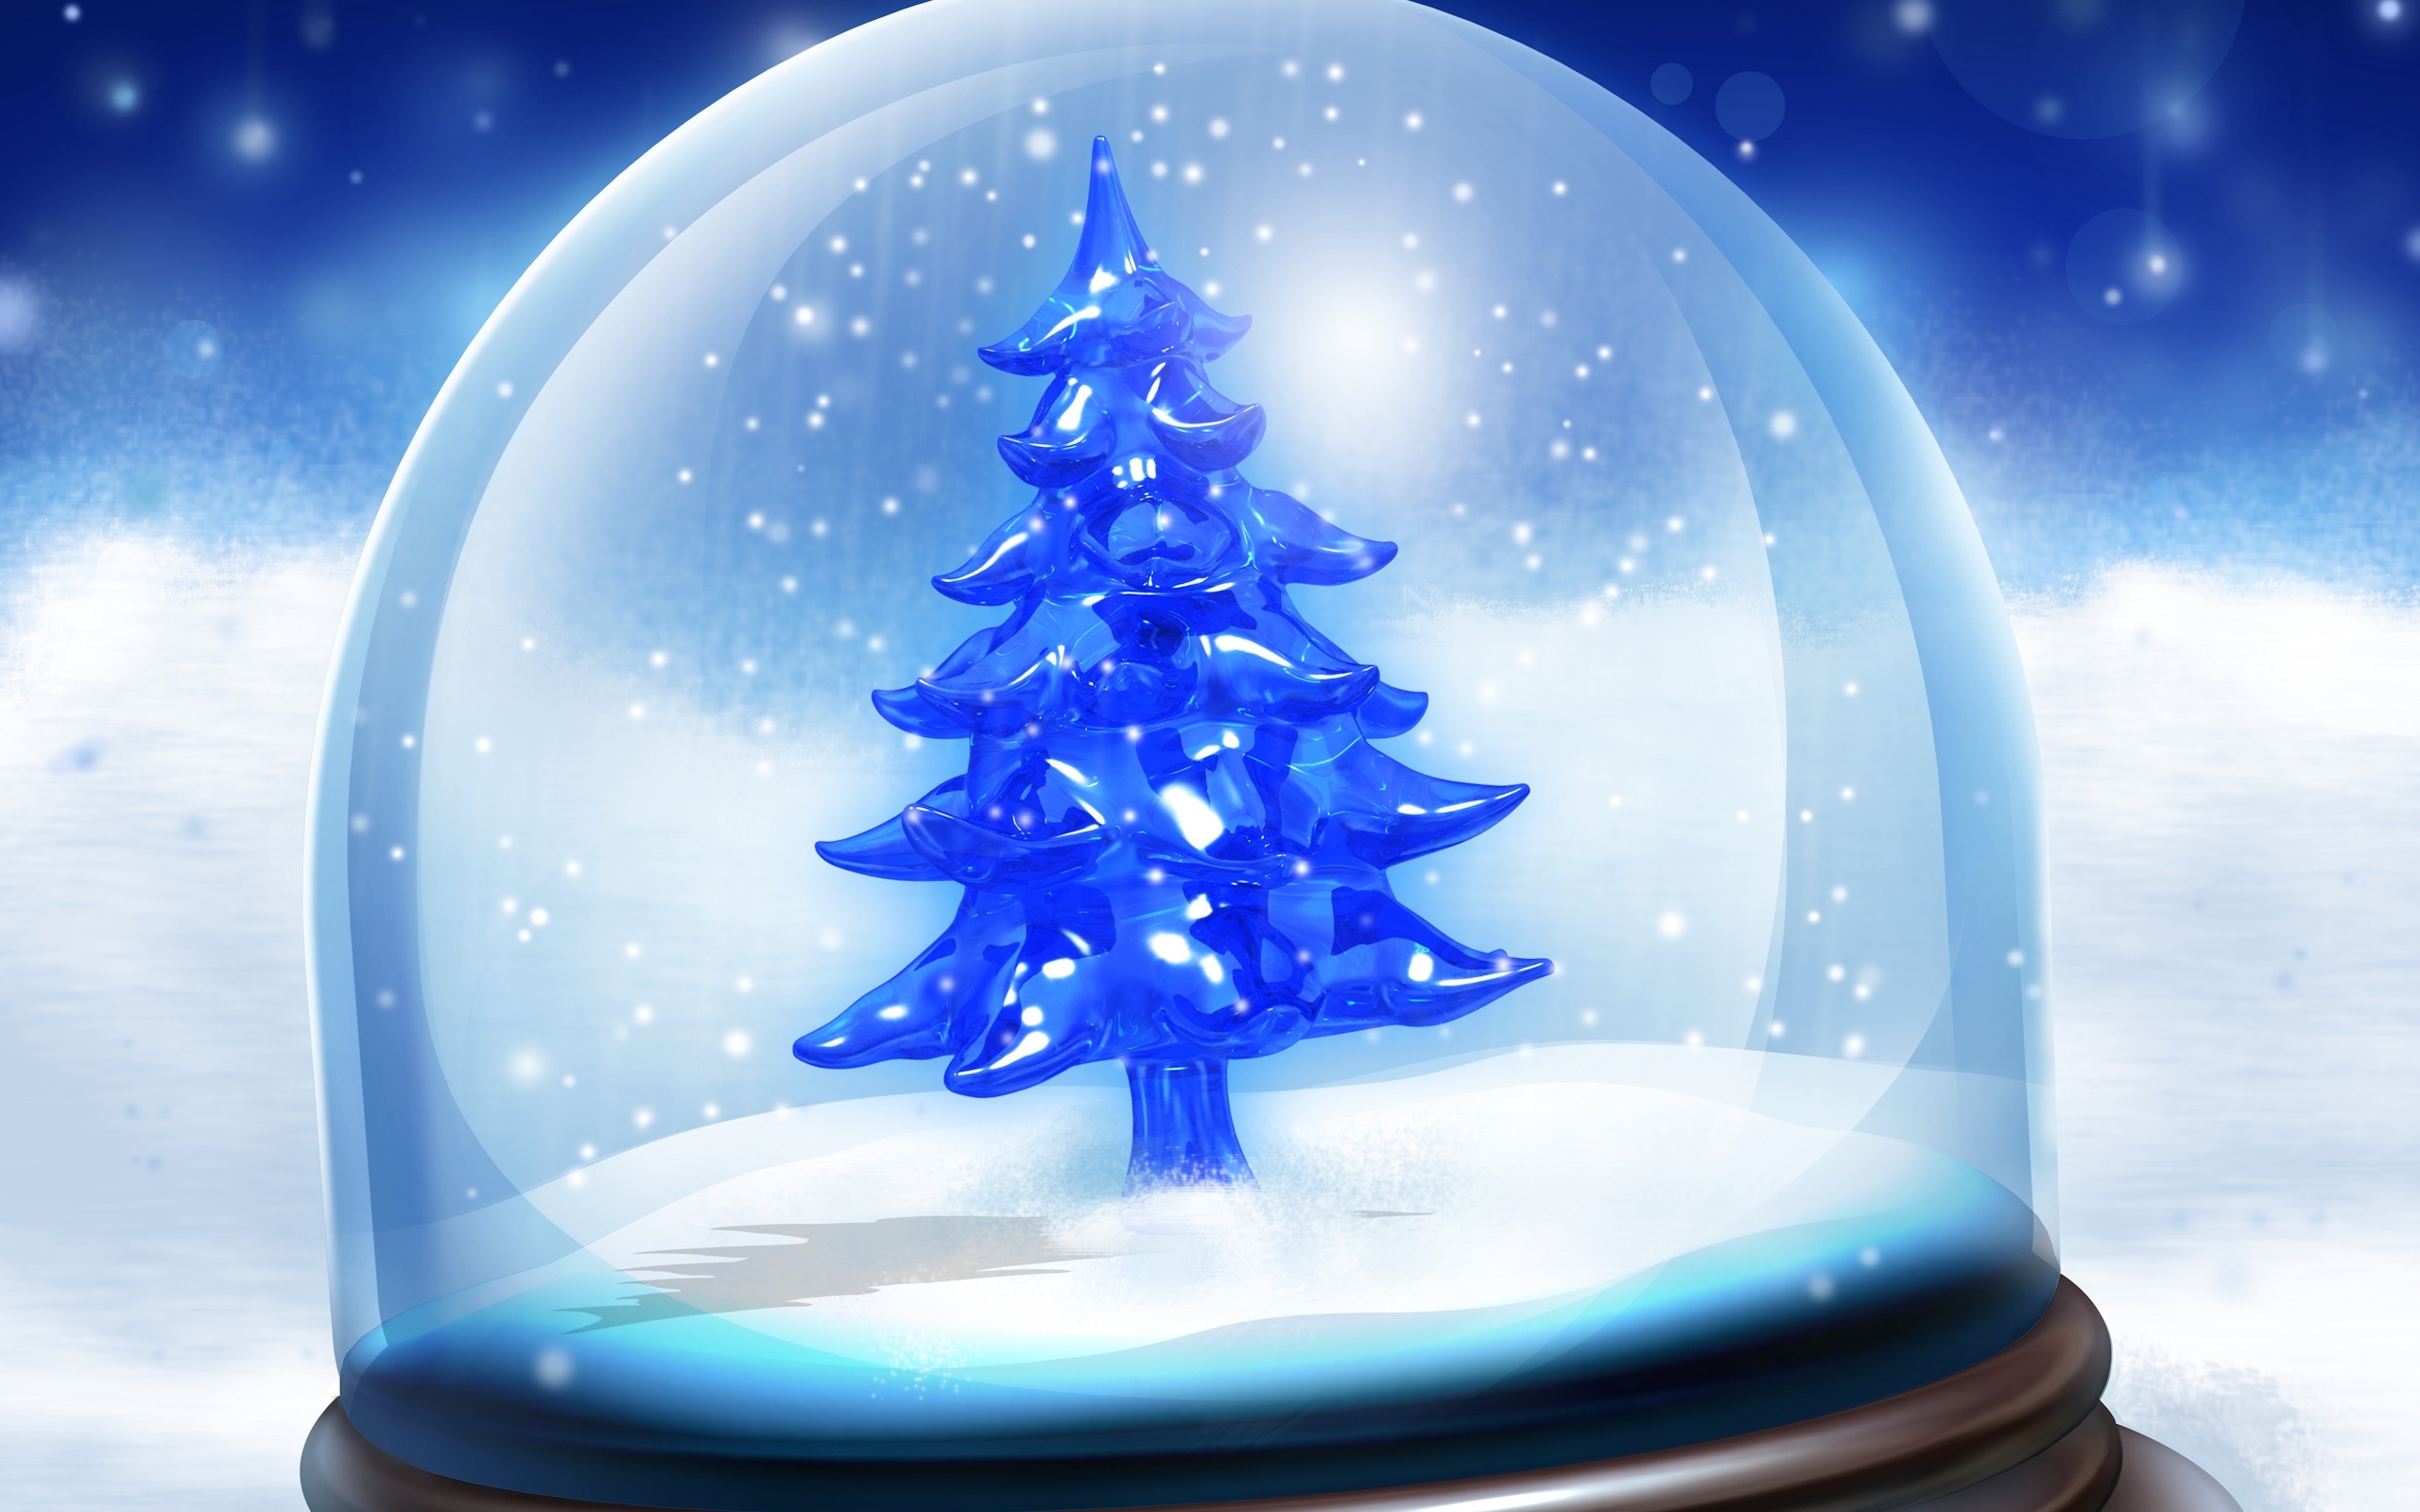 fir trees, winter, background, snow, blue cell phone wallpapers